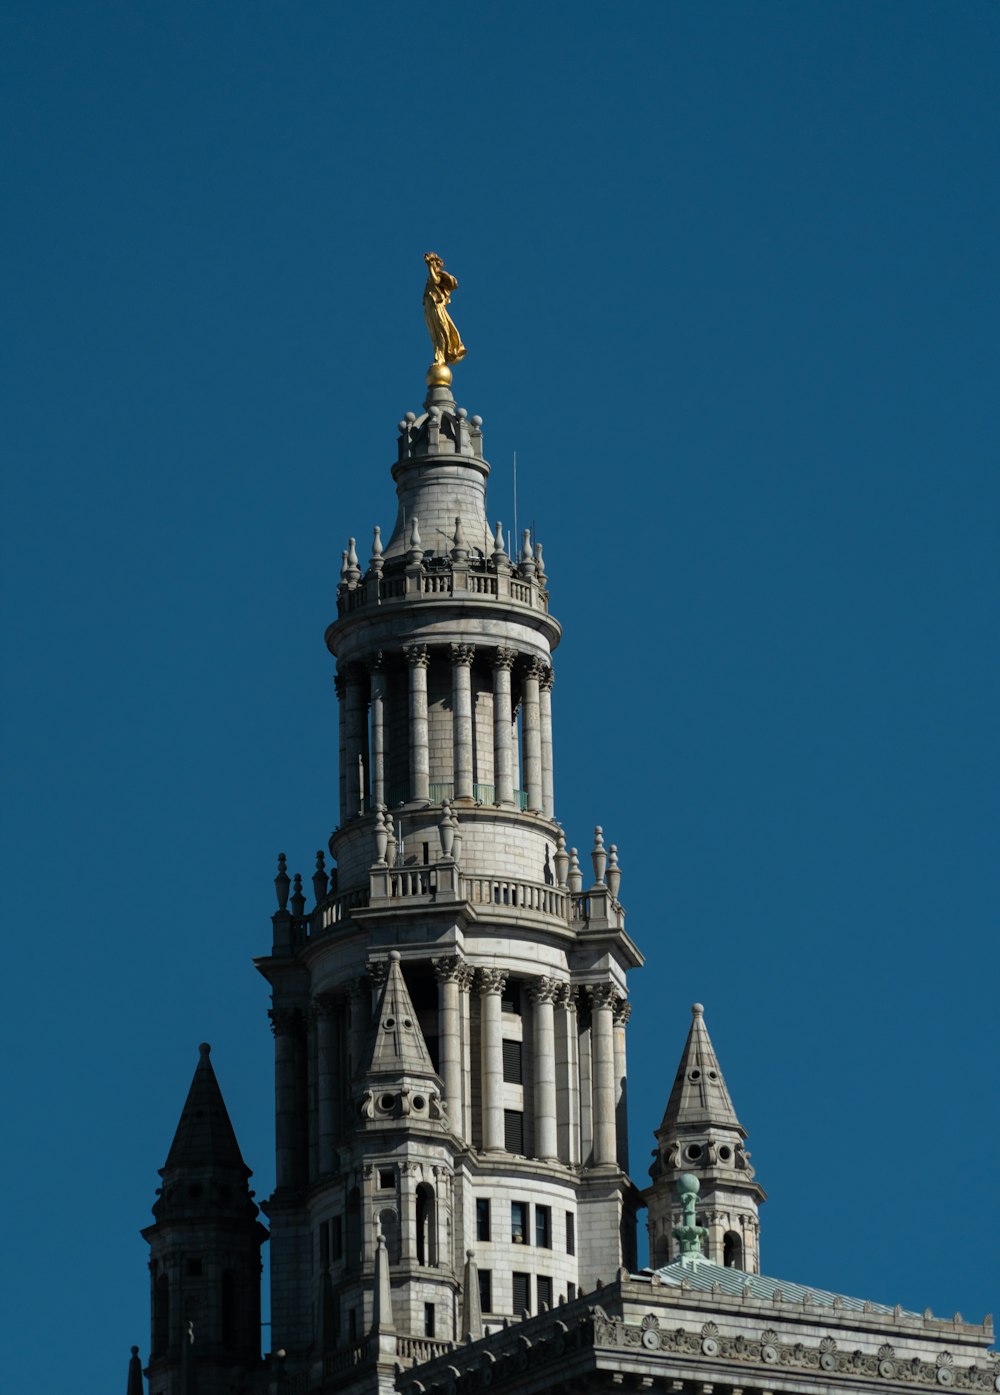 a clock tower with a statue on top of it